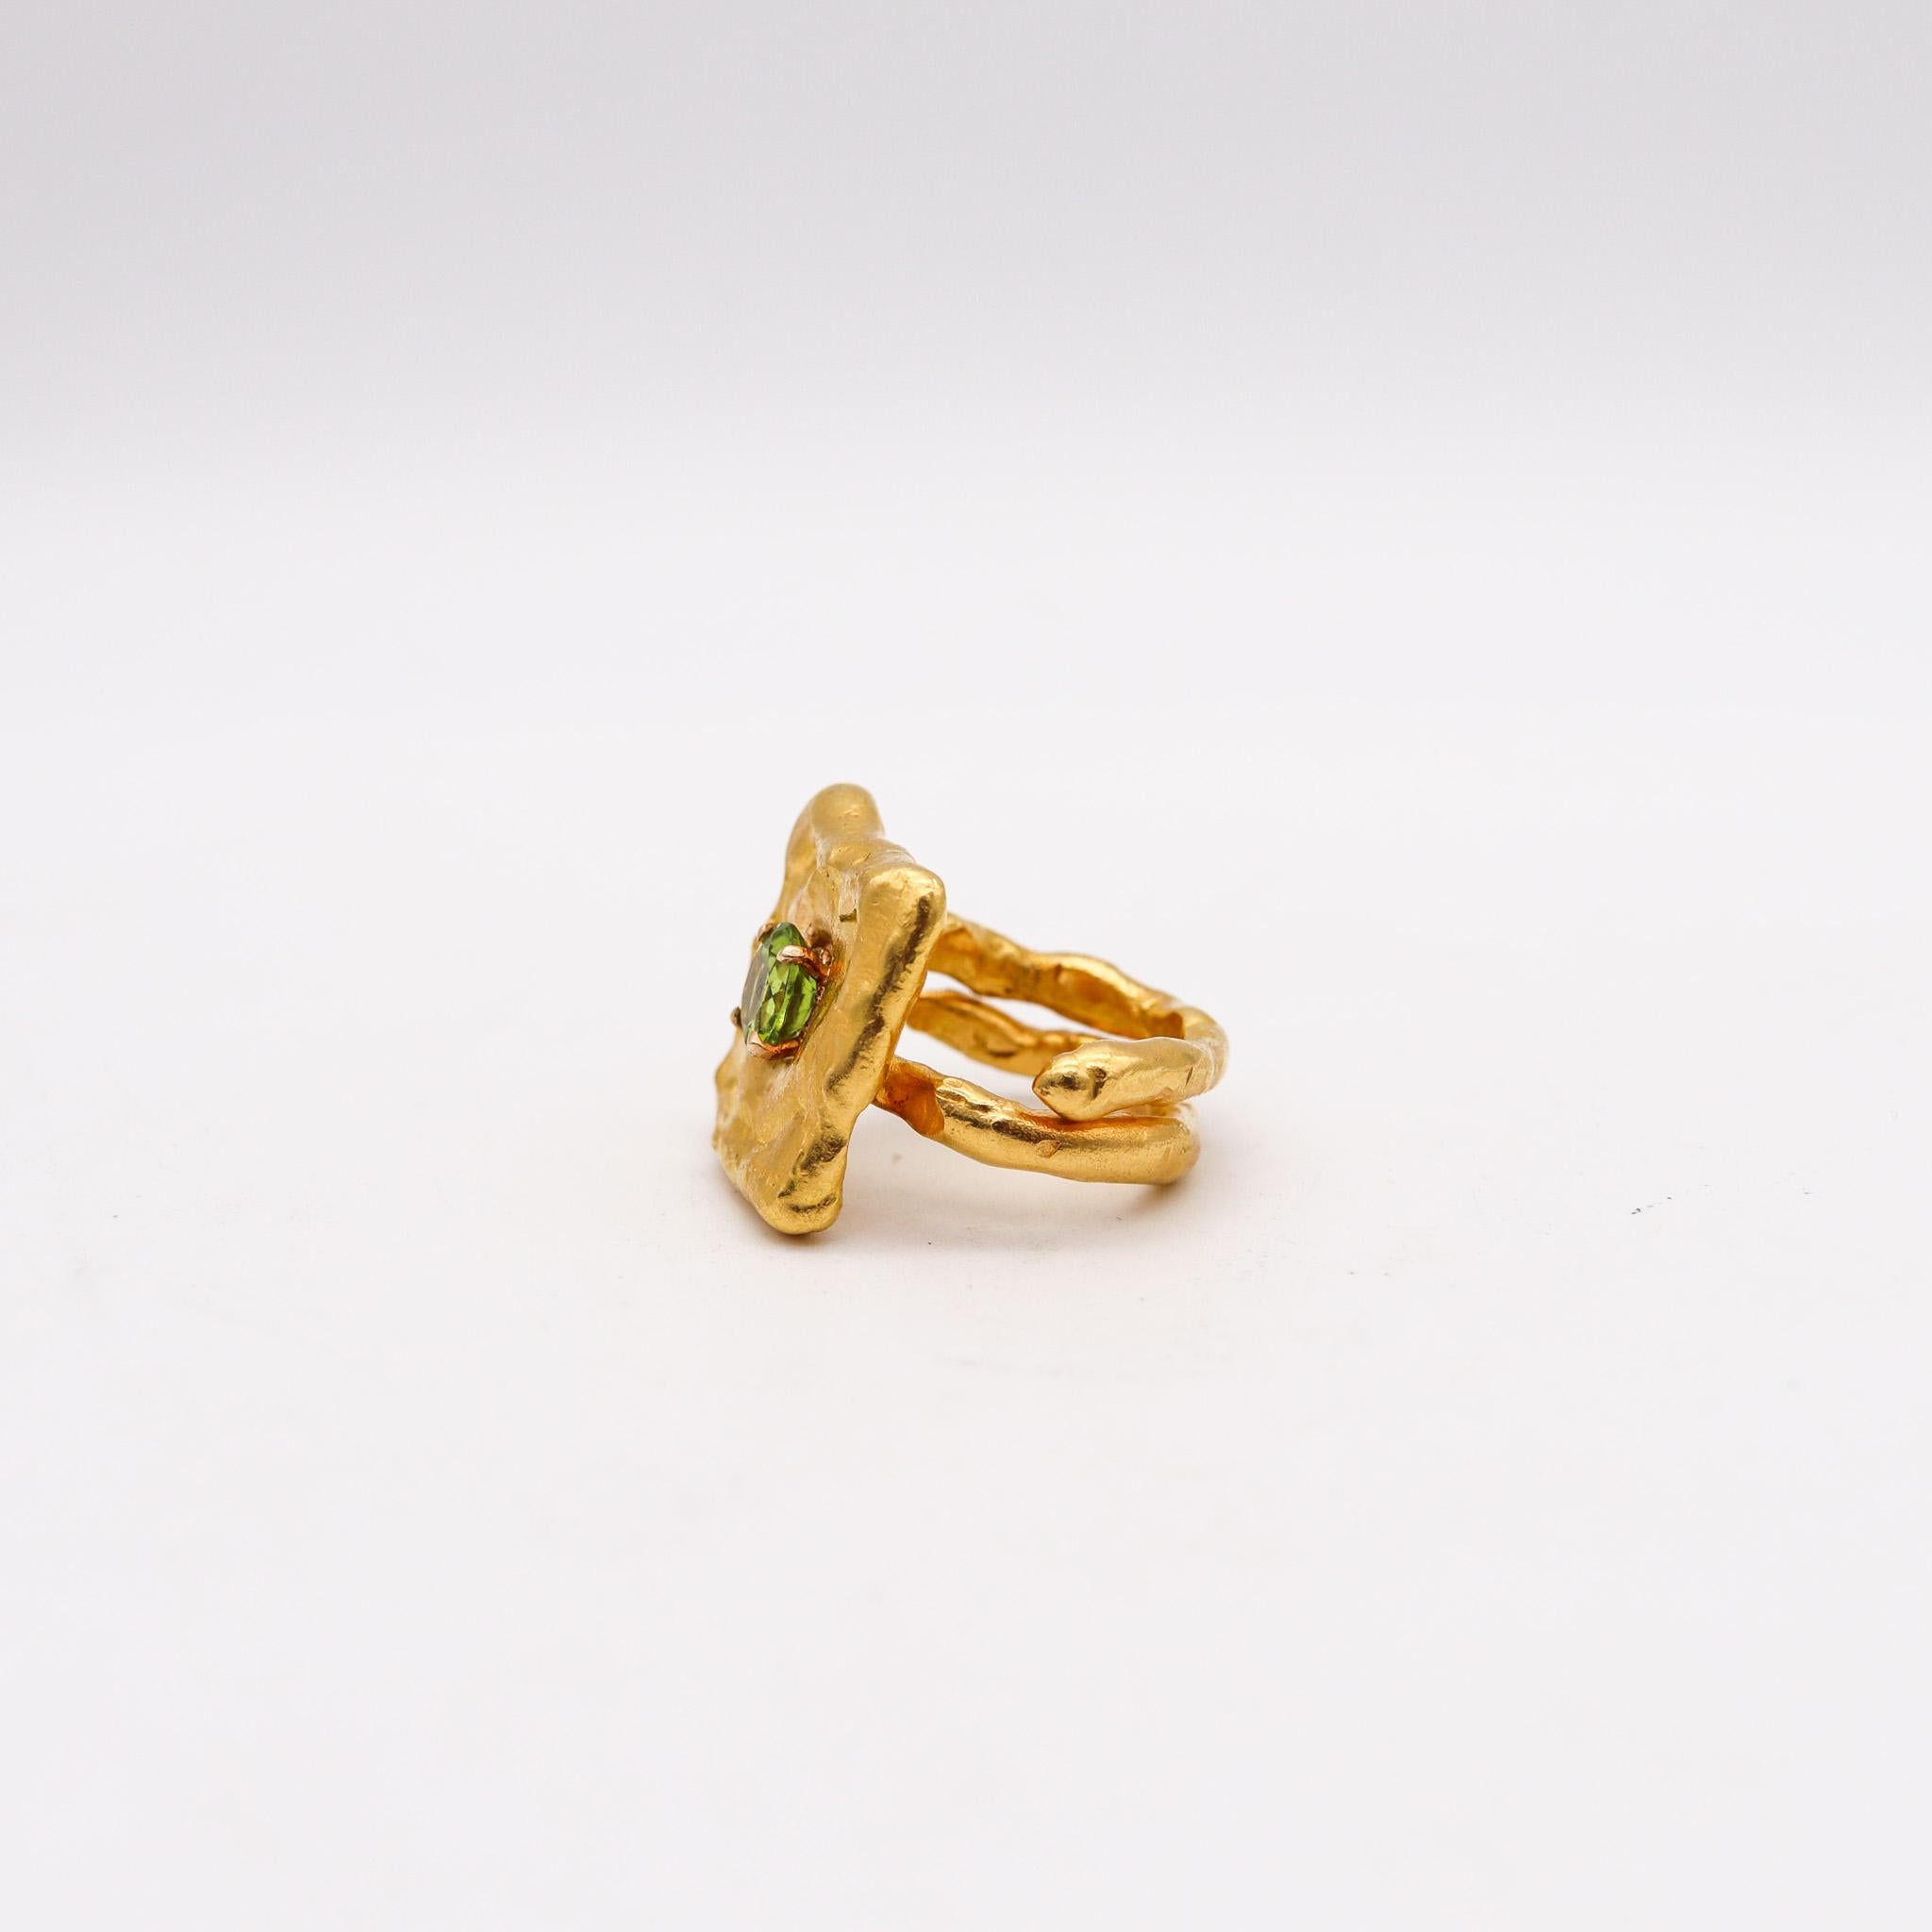 Jean Mahie Paris Rare Sculptural Cocktail Ring In 22Kt Yellow Gold With Peridot In Excellent Condition For Sale In Miami, FL